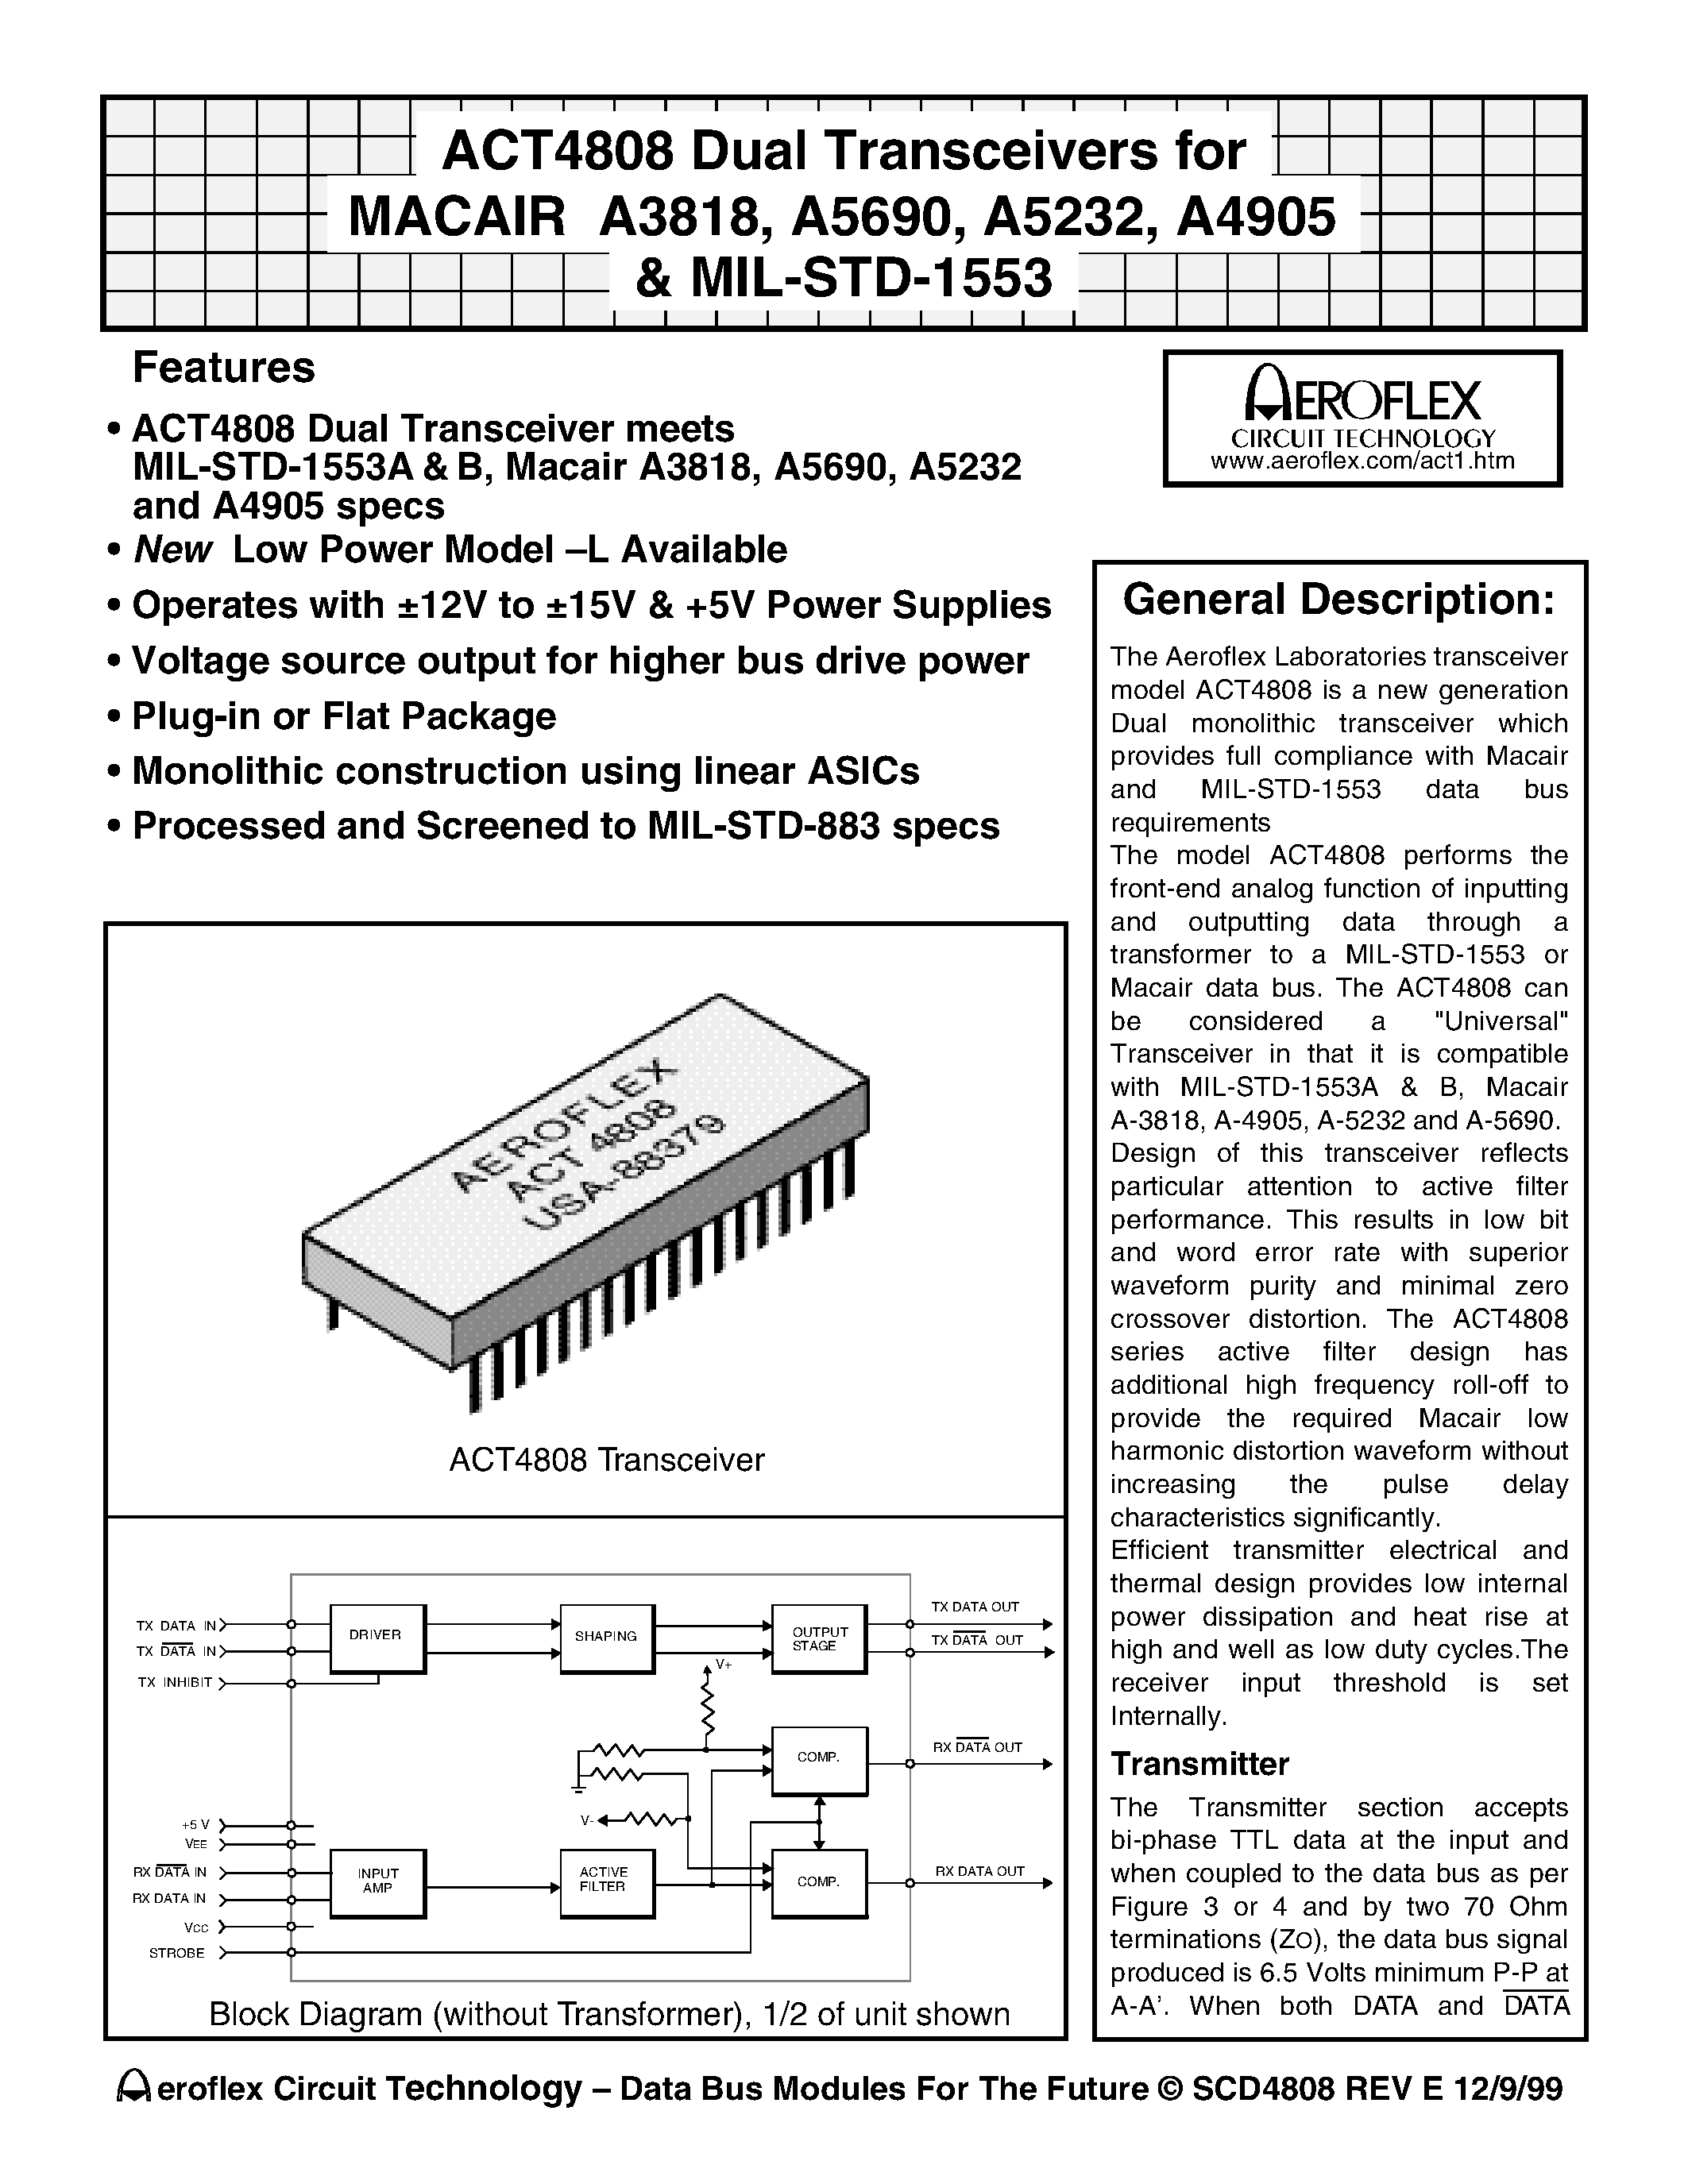 Datasheet ACT4808DF - ACT4808 DUAL TRANSCEIVERS FOR MACAIR A3818/ A5690/ A5232/ A4905 & MIL-STD-1553 page 1